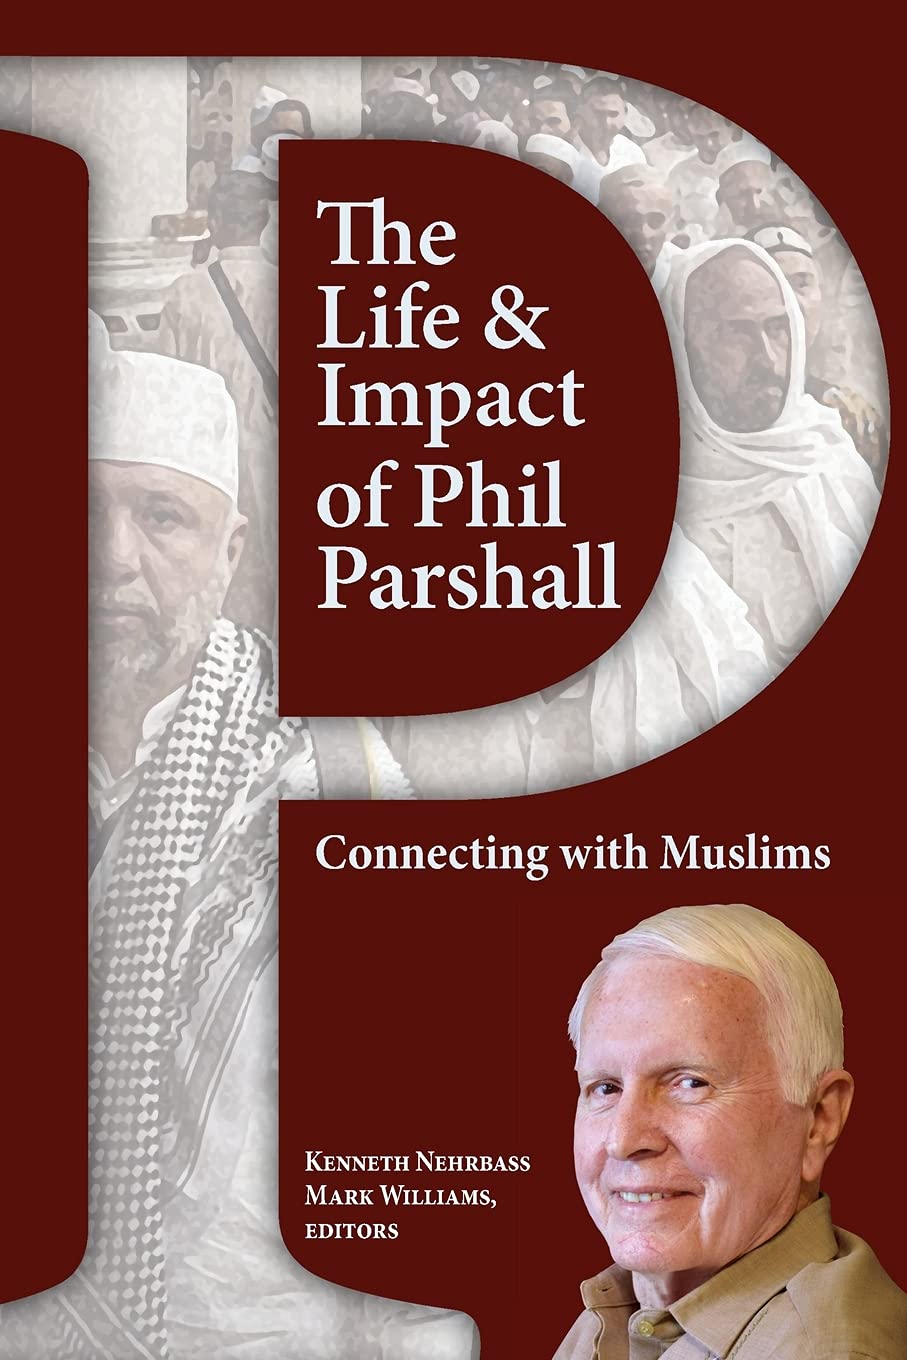 The Life & Impact of Phil Parshall